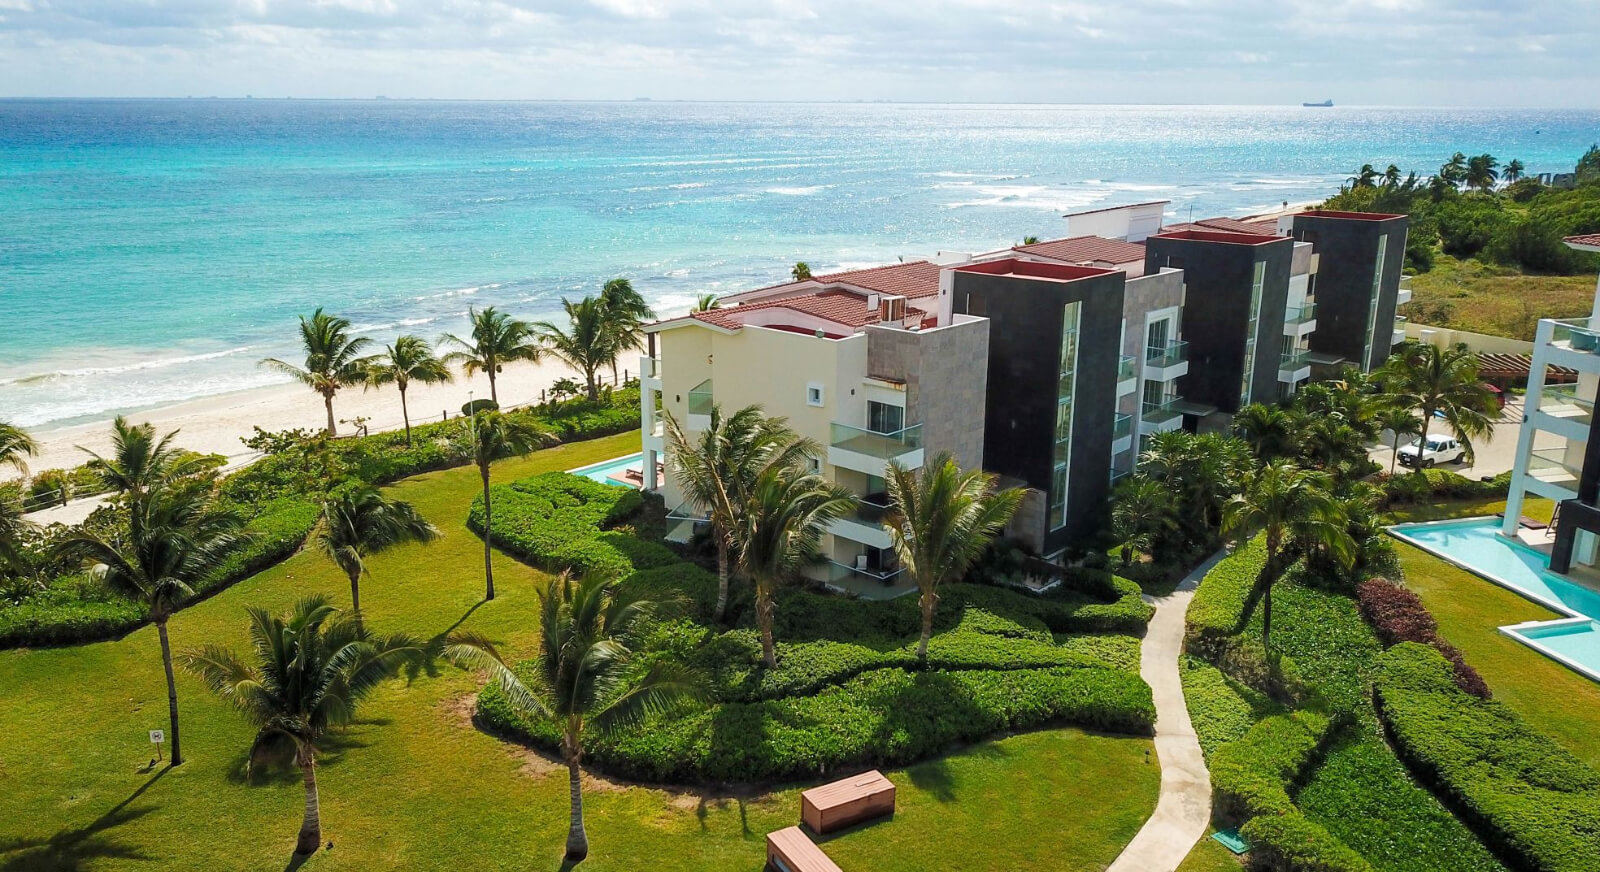 Beachfront condo, ocean view terrace with hammocks.  furnished, steps from Fifth Avenue, for sale Playa del Carmen.